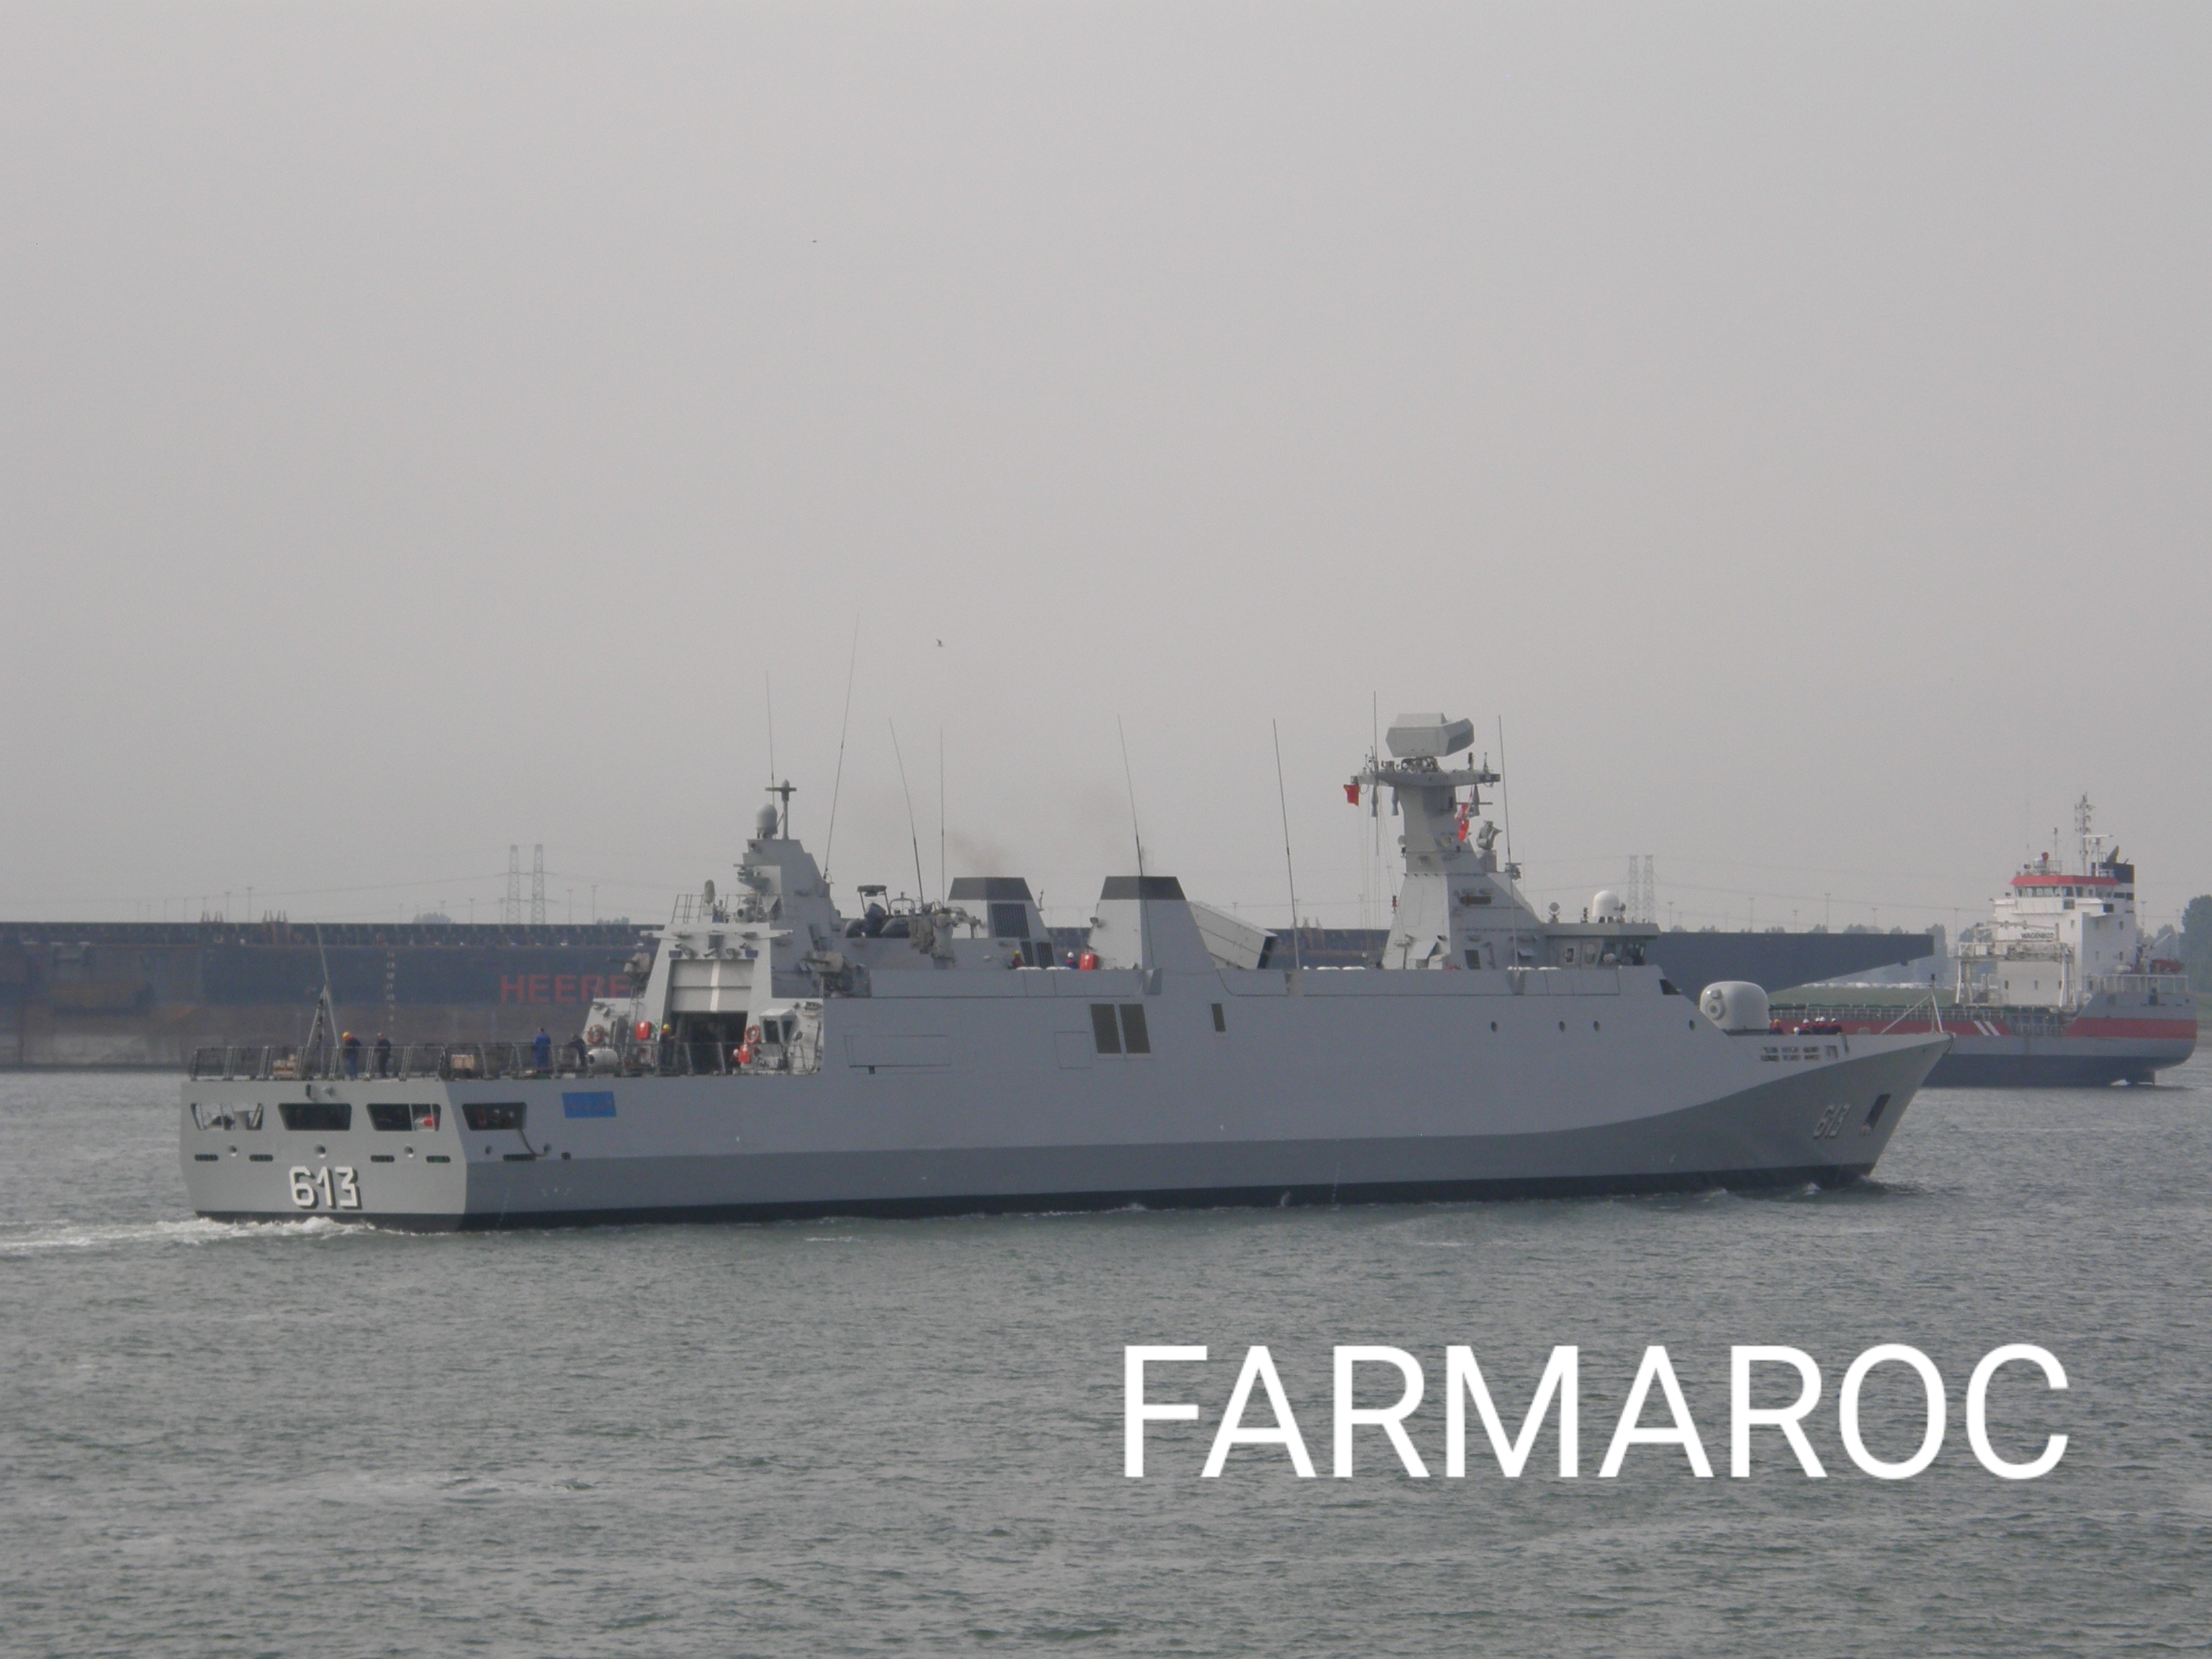 Royal Moroccan Navy Sigma class frigates / Frégates marocaines multimissions Sigma - Page 24 42792453842_6390a1c8b6_o